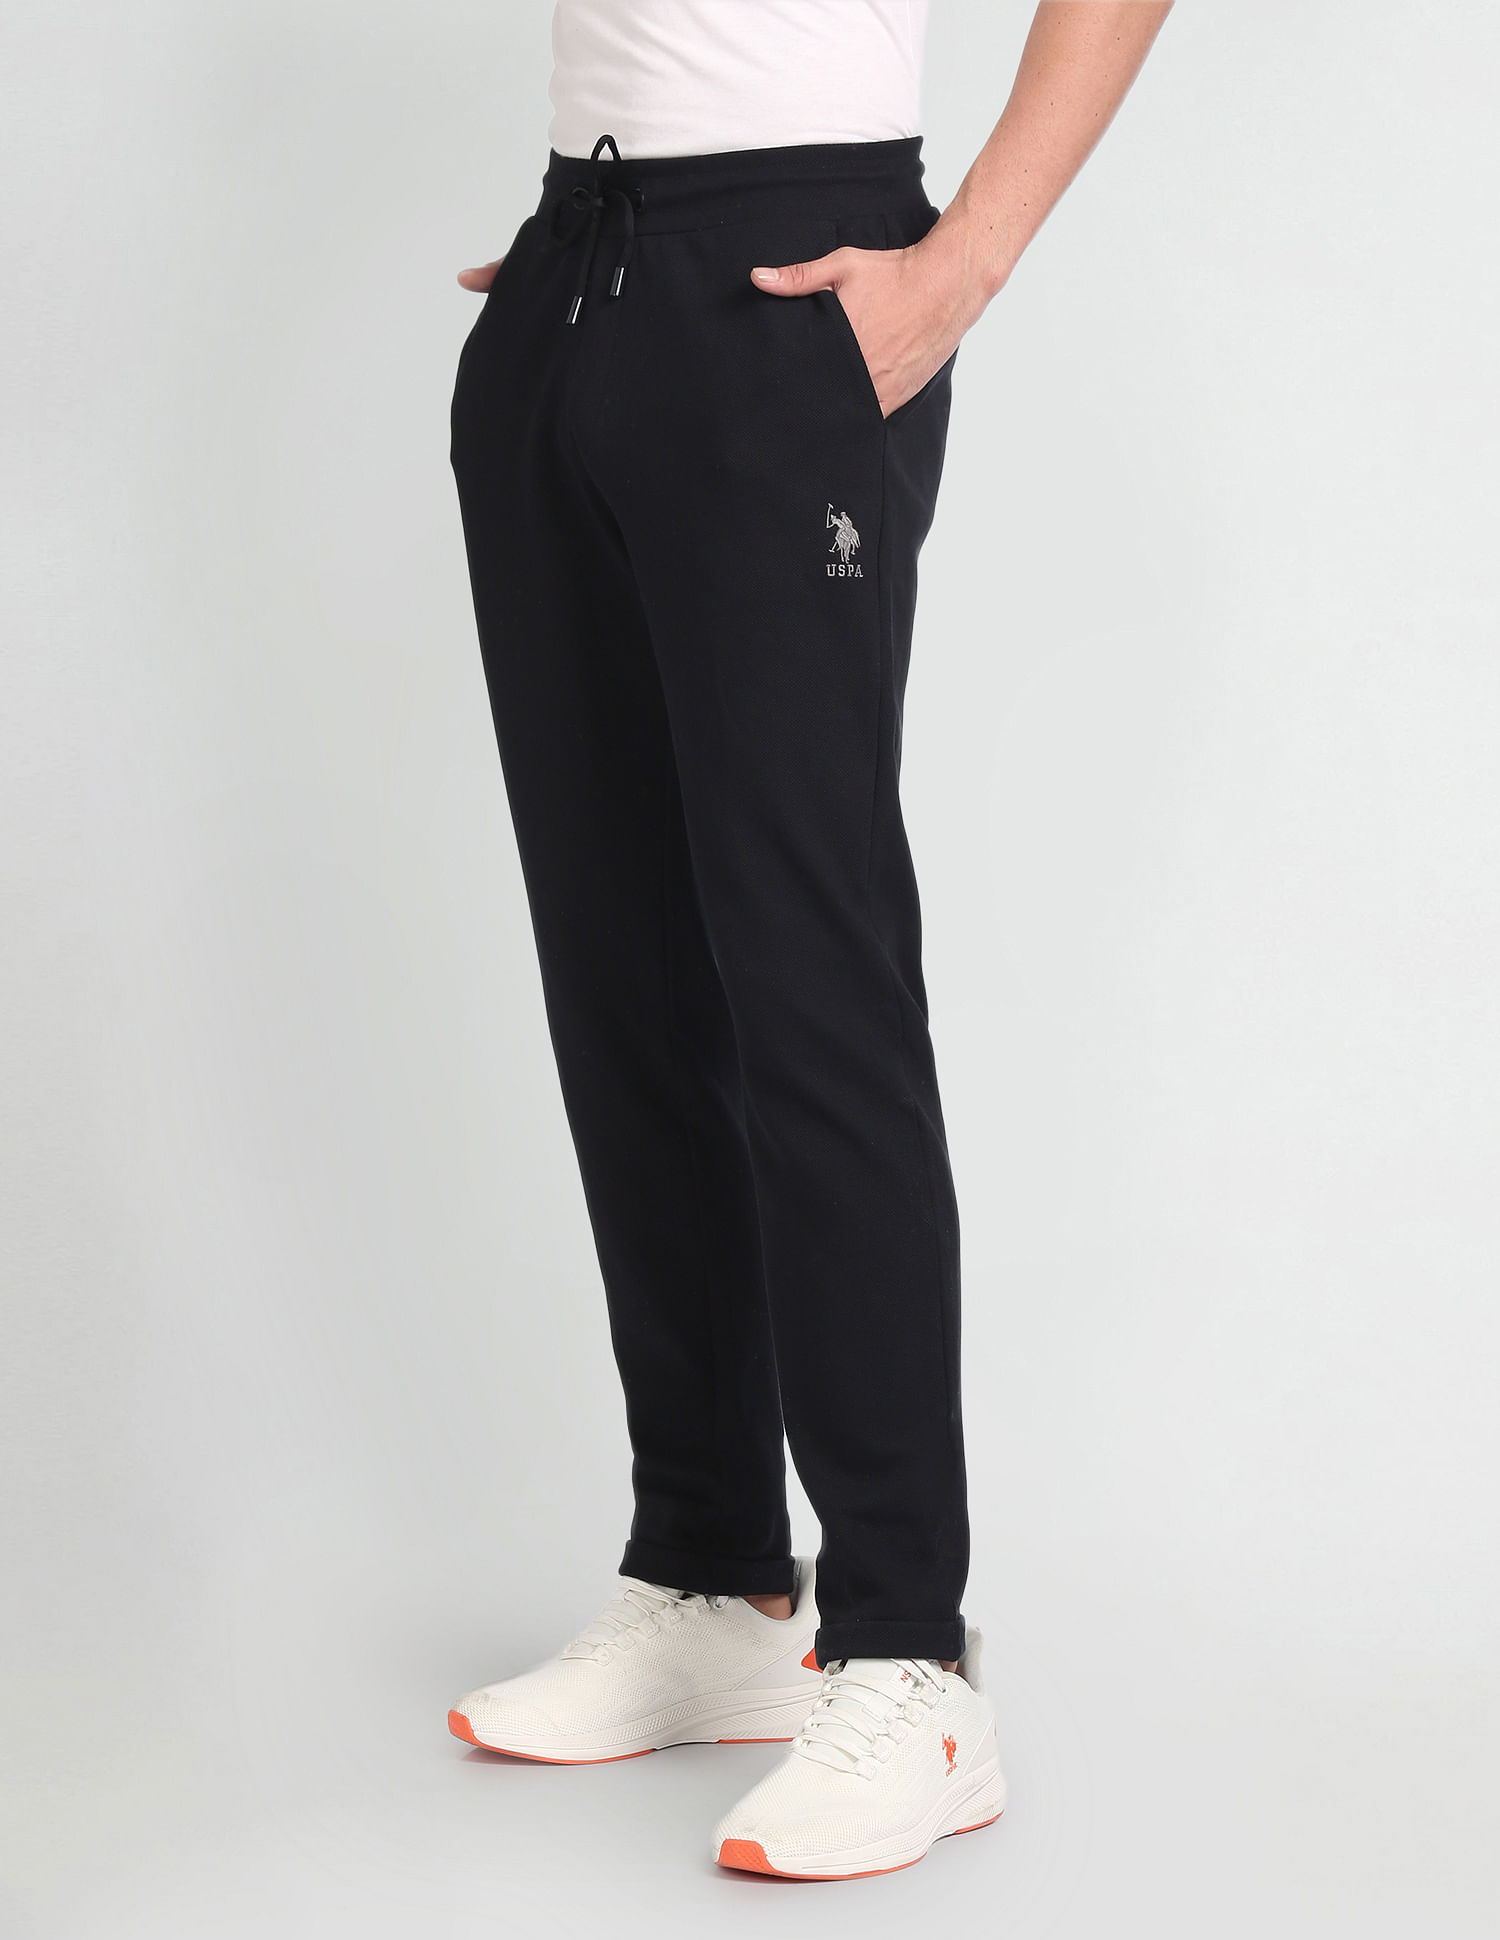 Plain 4way lycra Branded First copy Trackpant, Sportswear Type : multi  sports, Size : XL, XXL at Rs 165 / piece in delhi